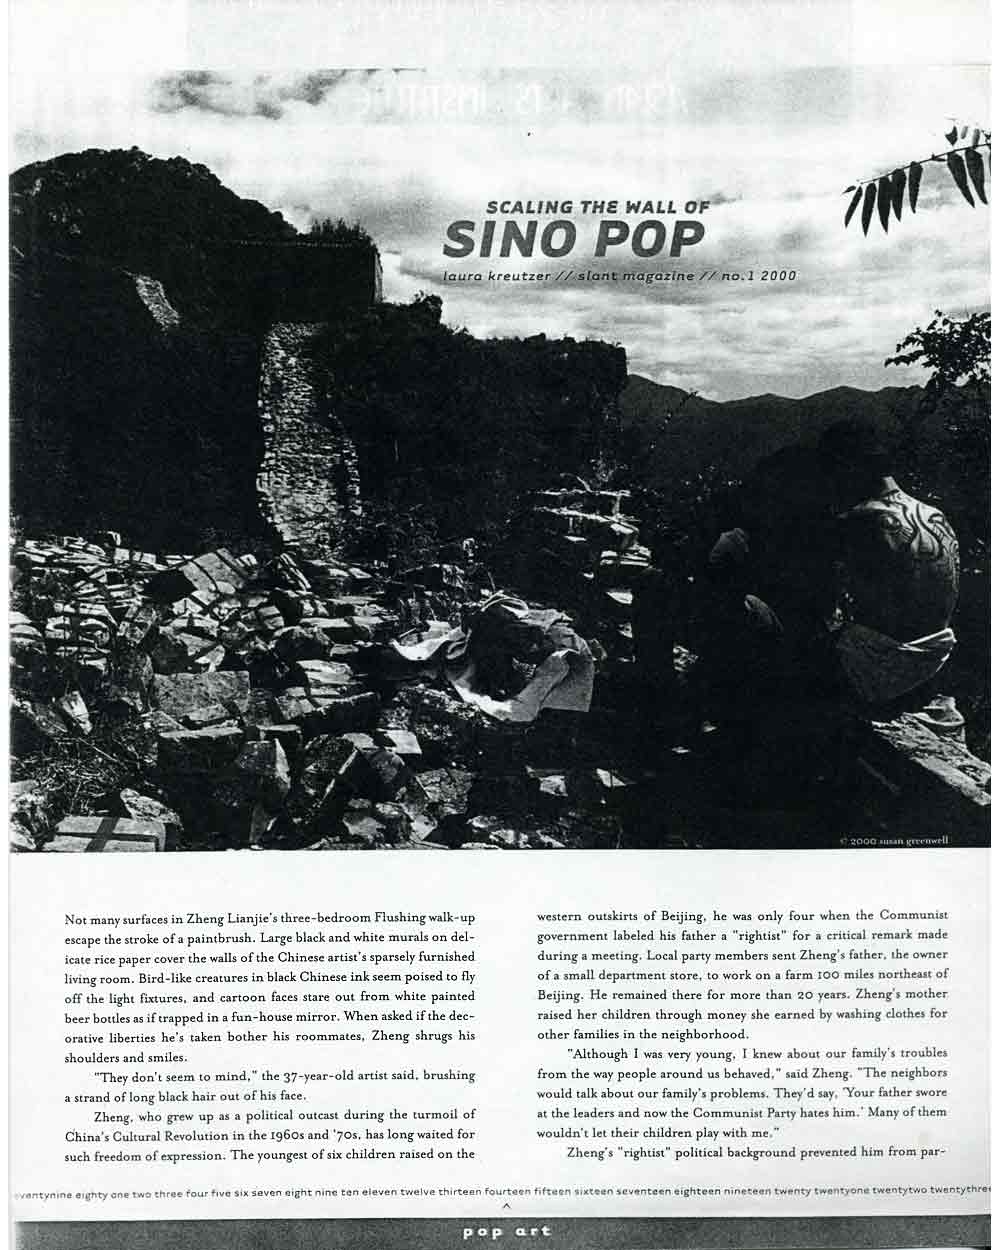 Article, Scaling the Wall of Sino Pop, pg 2